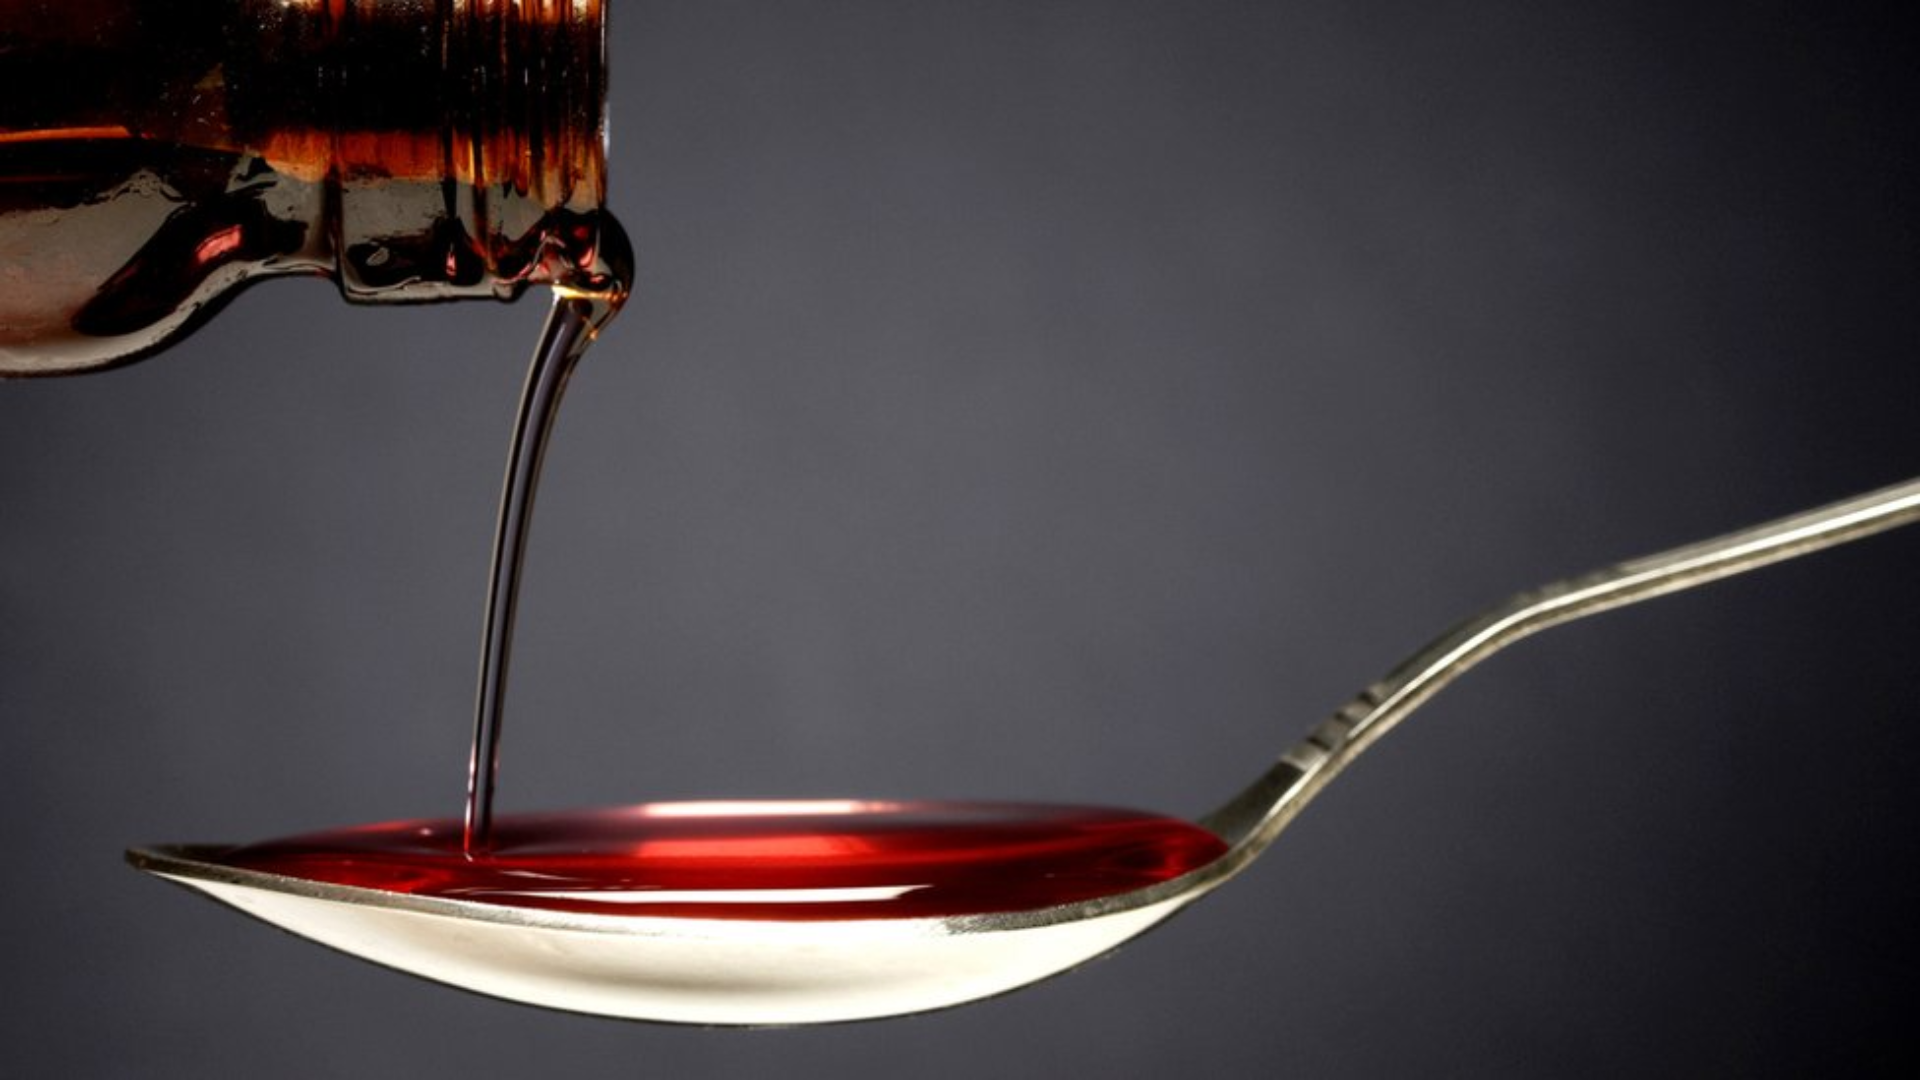 Cough Syrup Death: Indian Including 23 Others Sentenced In Uzbekistan